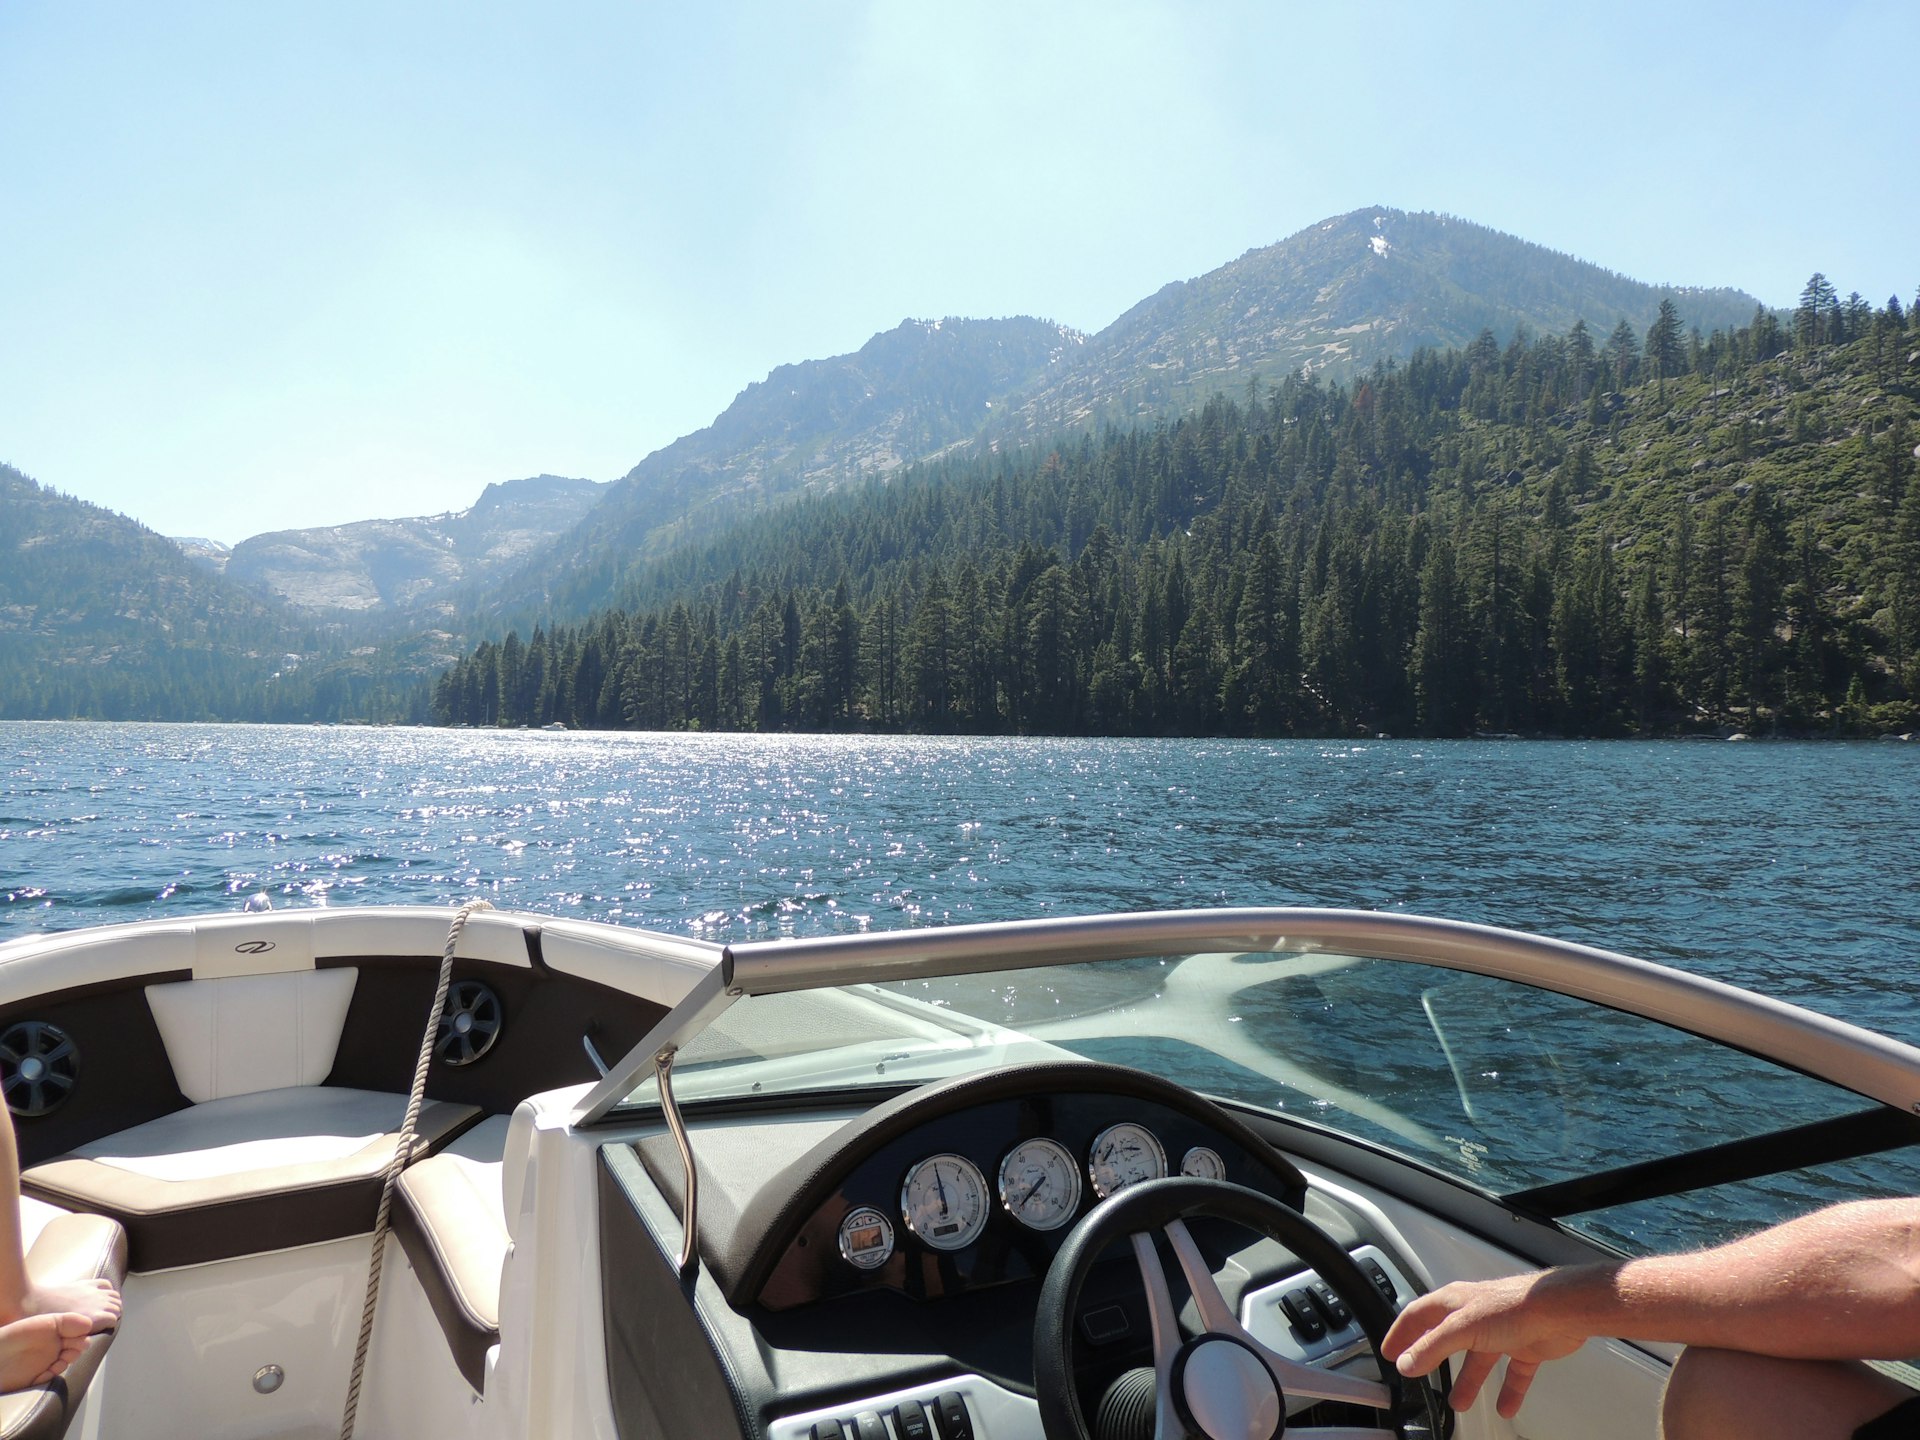 GetMyBoat, a new app, offers the unique chance to rent a boat on the lake 